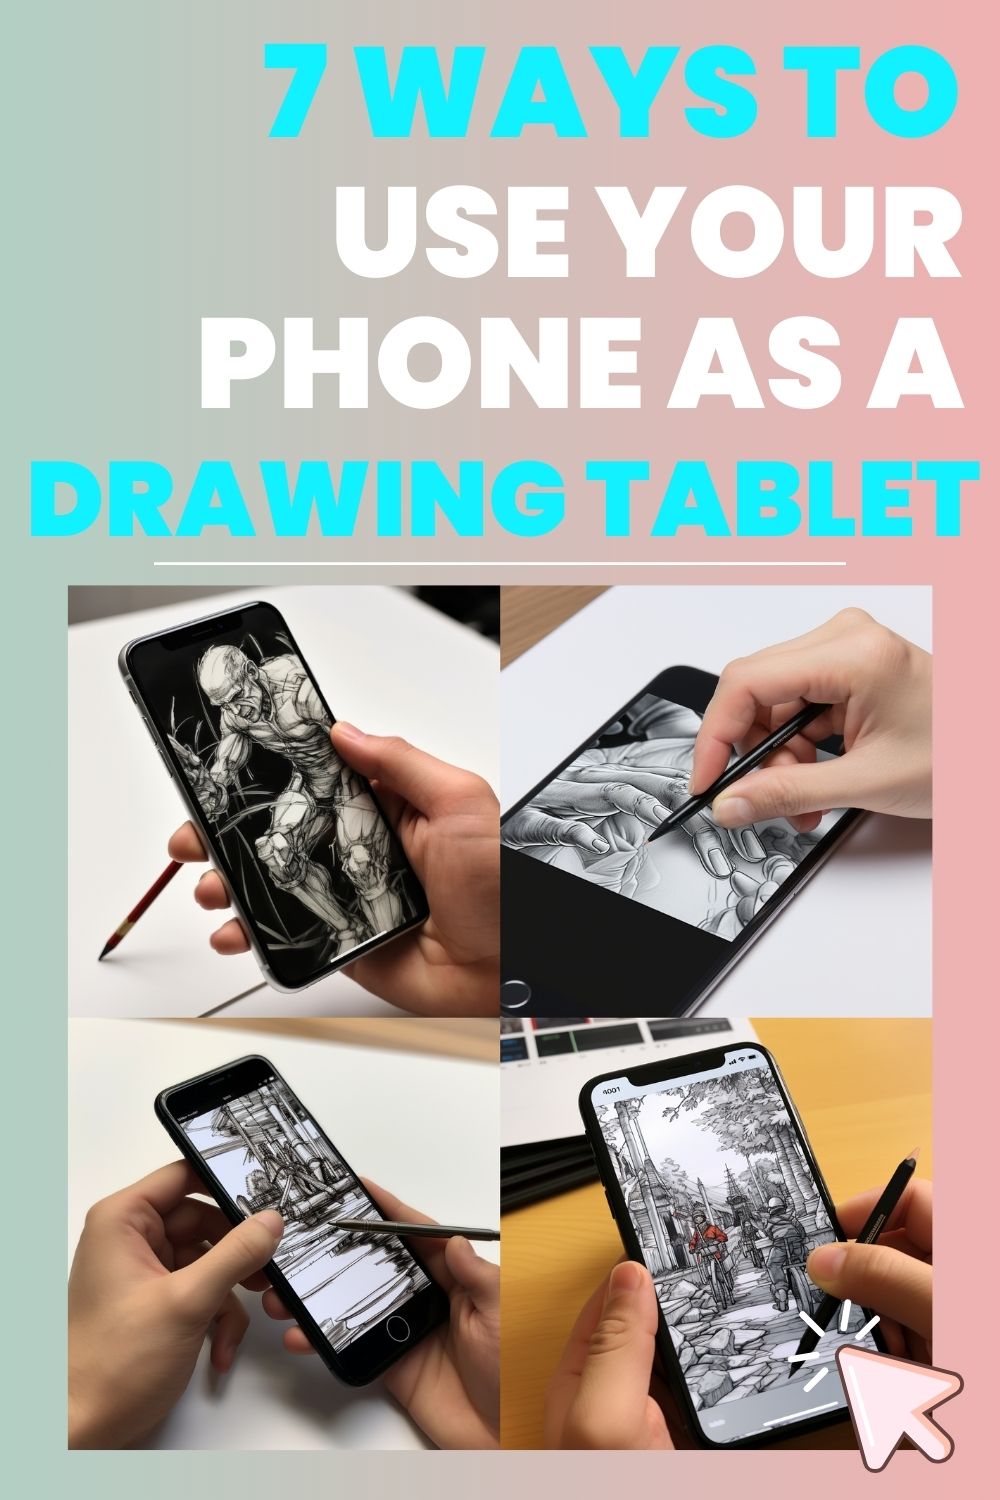 7 Ways to Use Your Phone as a Drawing Tablet